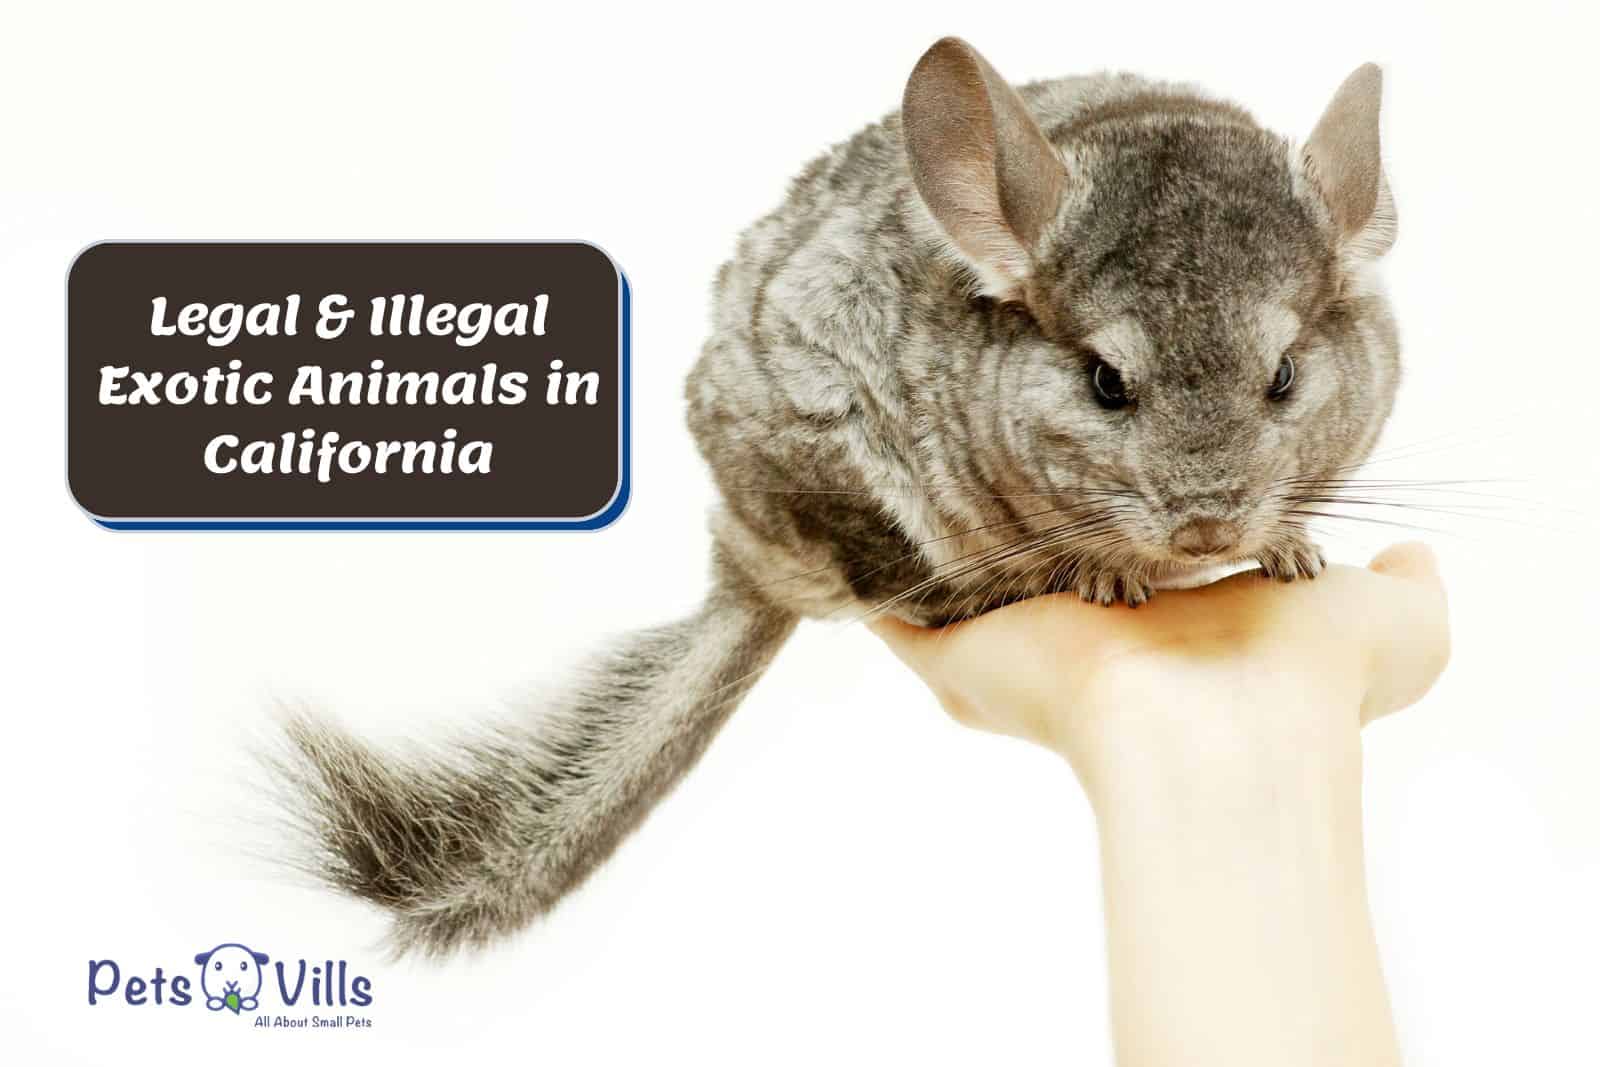 hand holding a chinchilla beside the text 